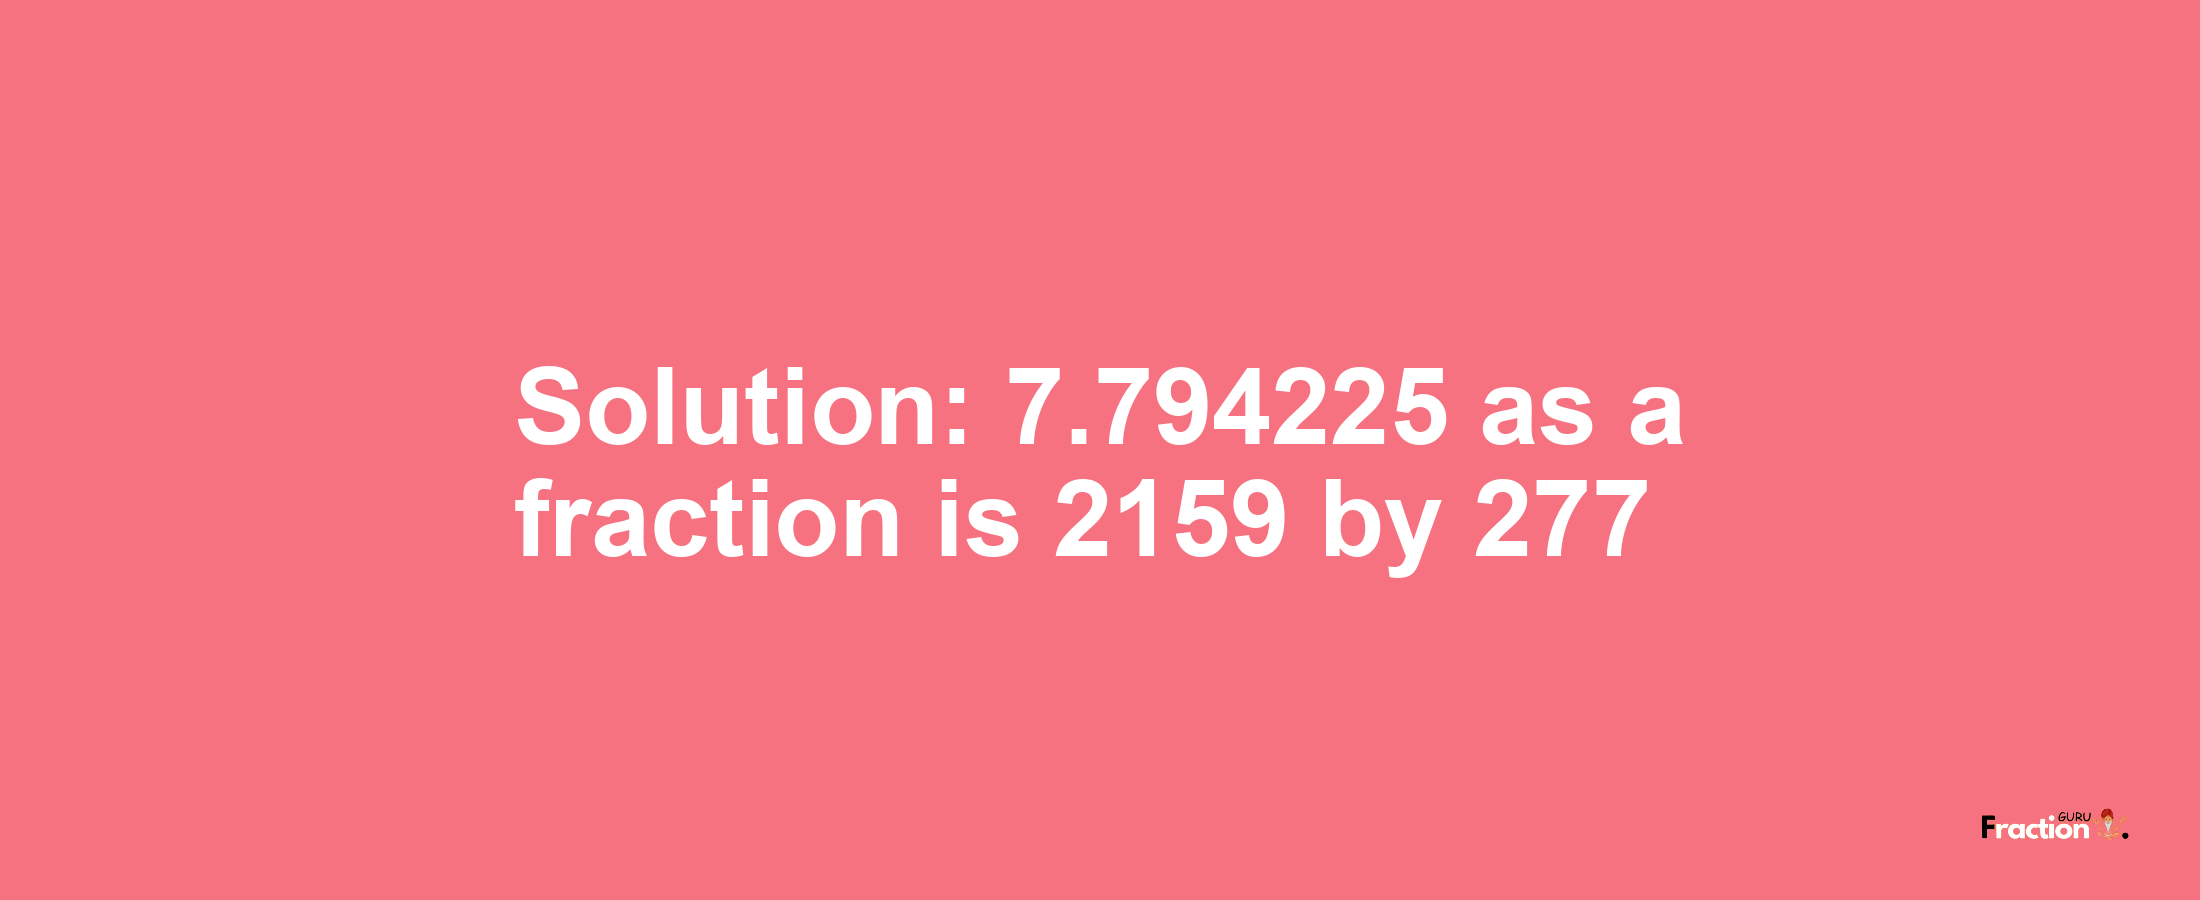 Solution:7.794225 as a fraction is 2159/277